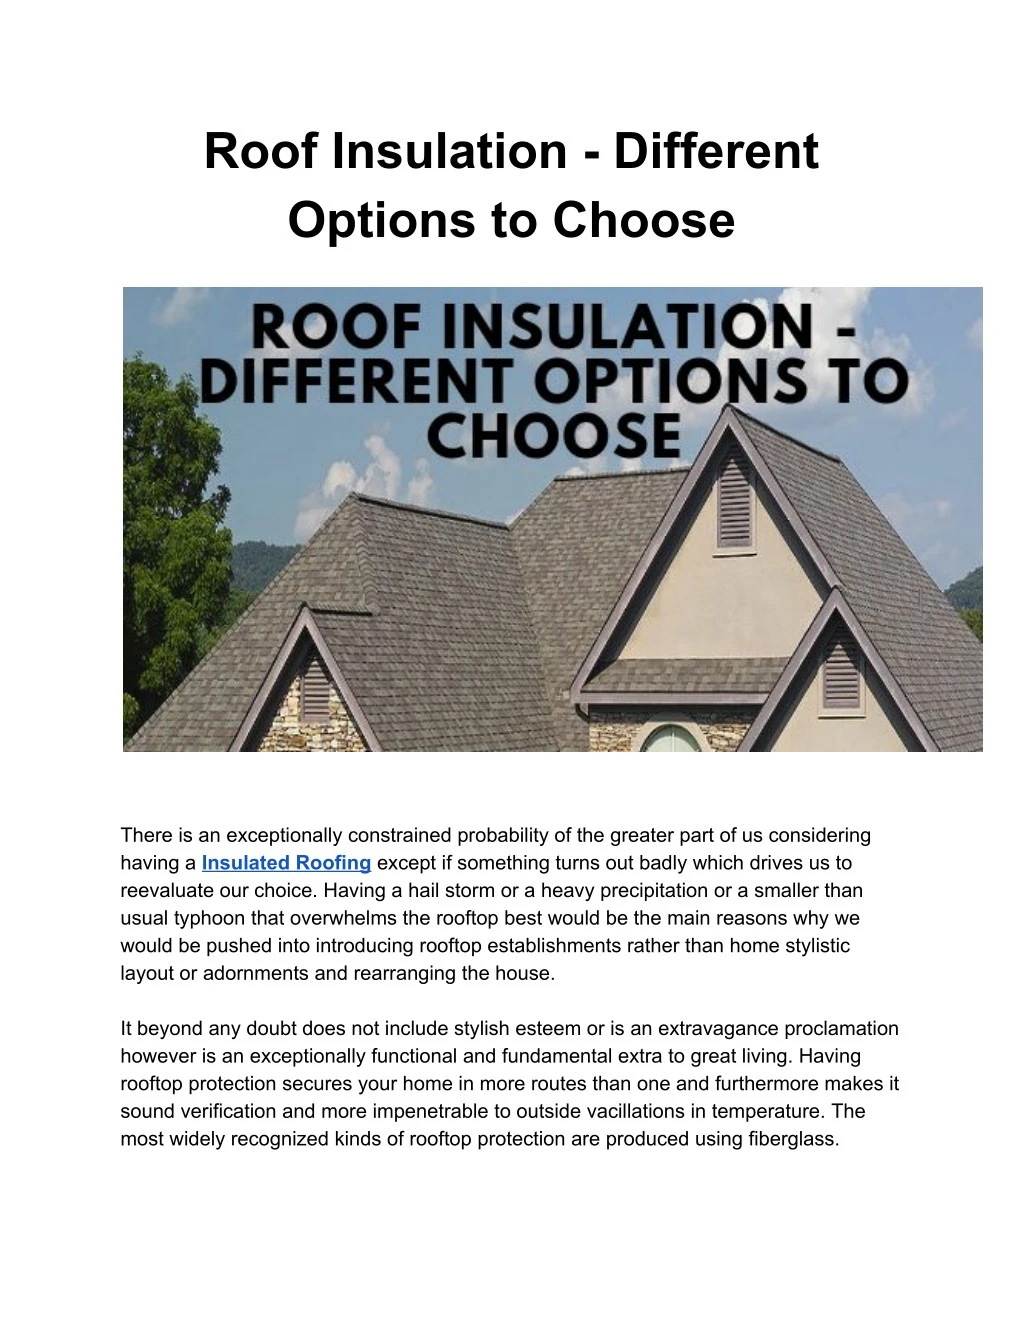 roof insulation different options to choose